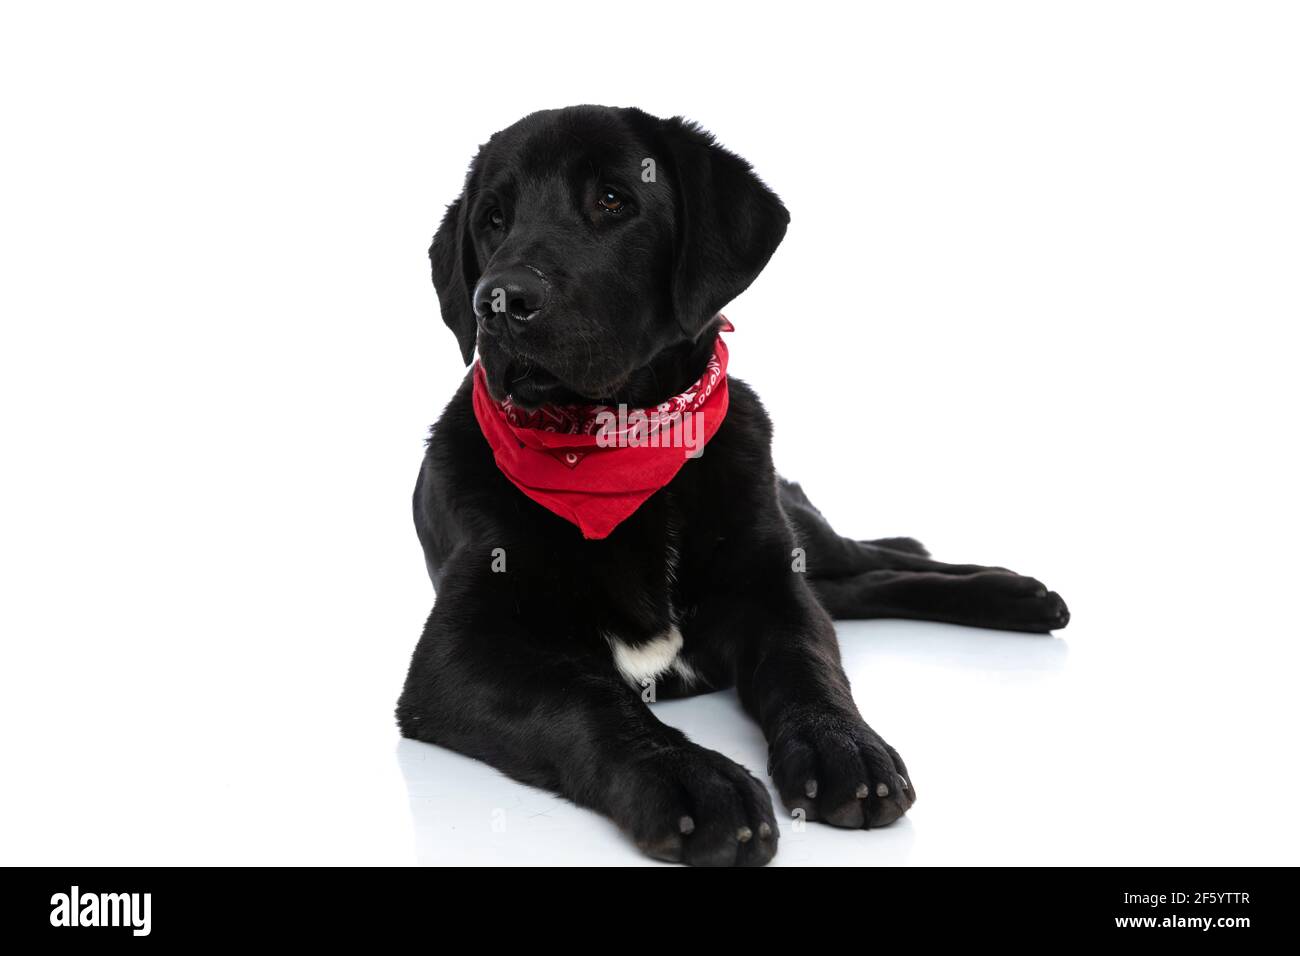 adorable labrador retriever dog lying down and wearing a red bandana  against white background Stock Photo - Alamy